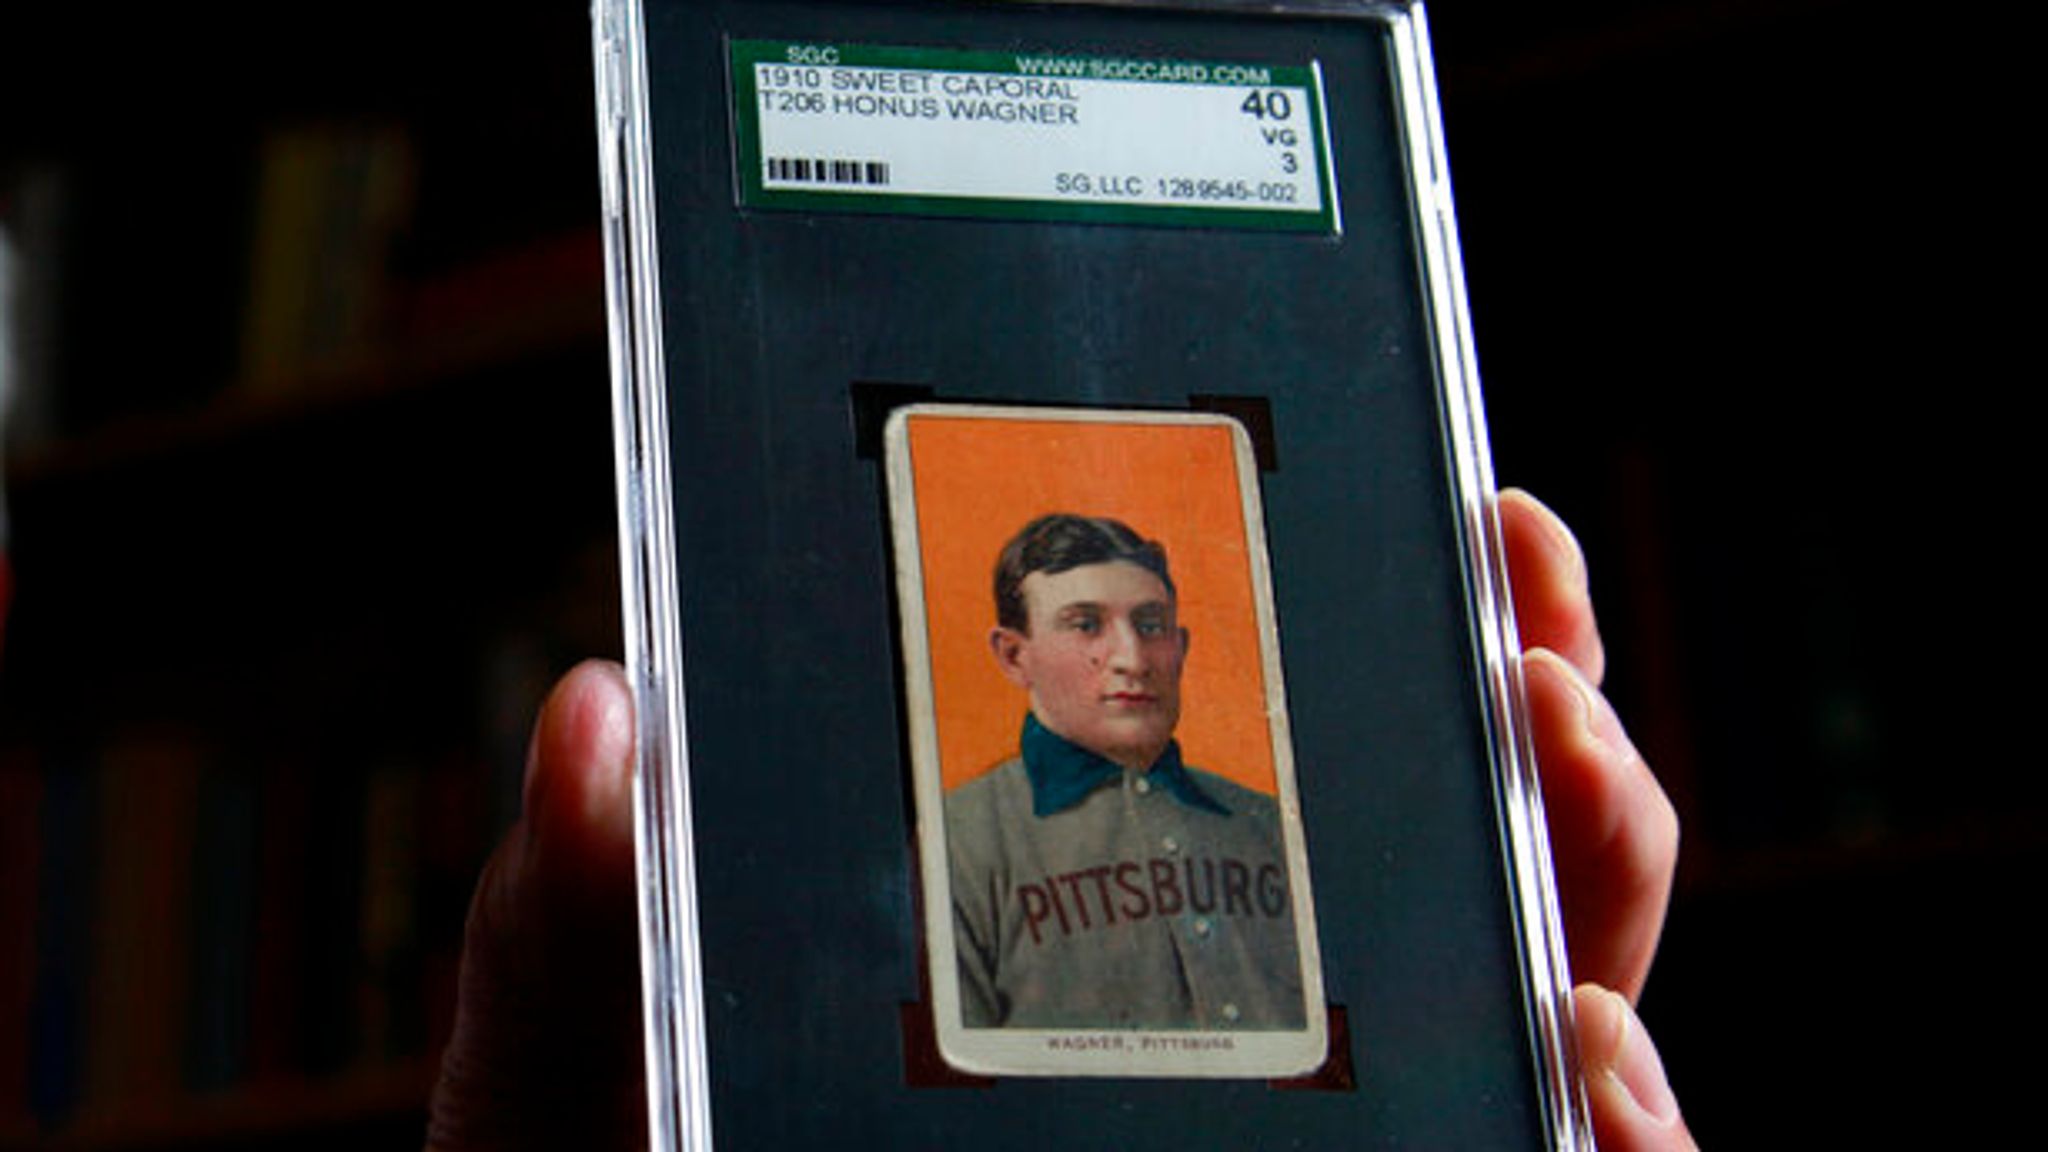  2021 Topps Project 70 Baseball Card #172 1987 Honus Wagner by  DJ Skee - Artist Rendition of 1909 T206 Tobacco Card : Collectibles & Fine  Art